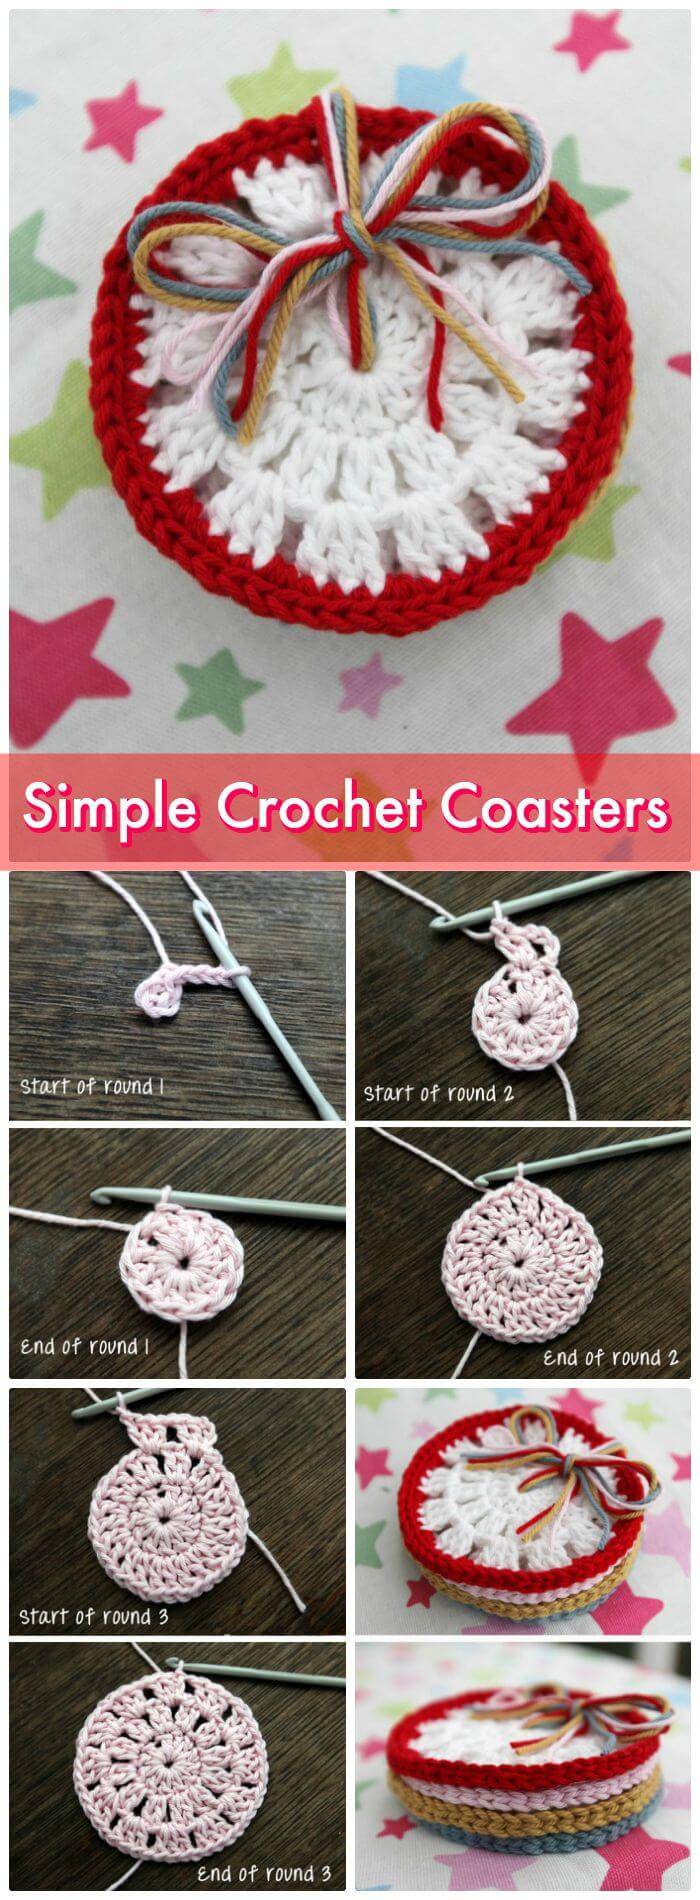 DIY Simple Crochet Coasters, How to crochet a coaster step-by-step! Free crochet coaster patterns with instructional guides!